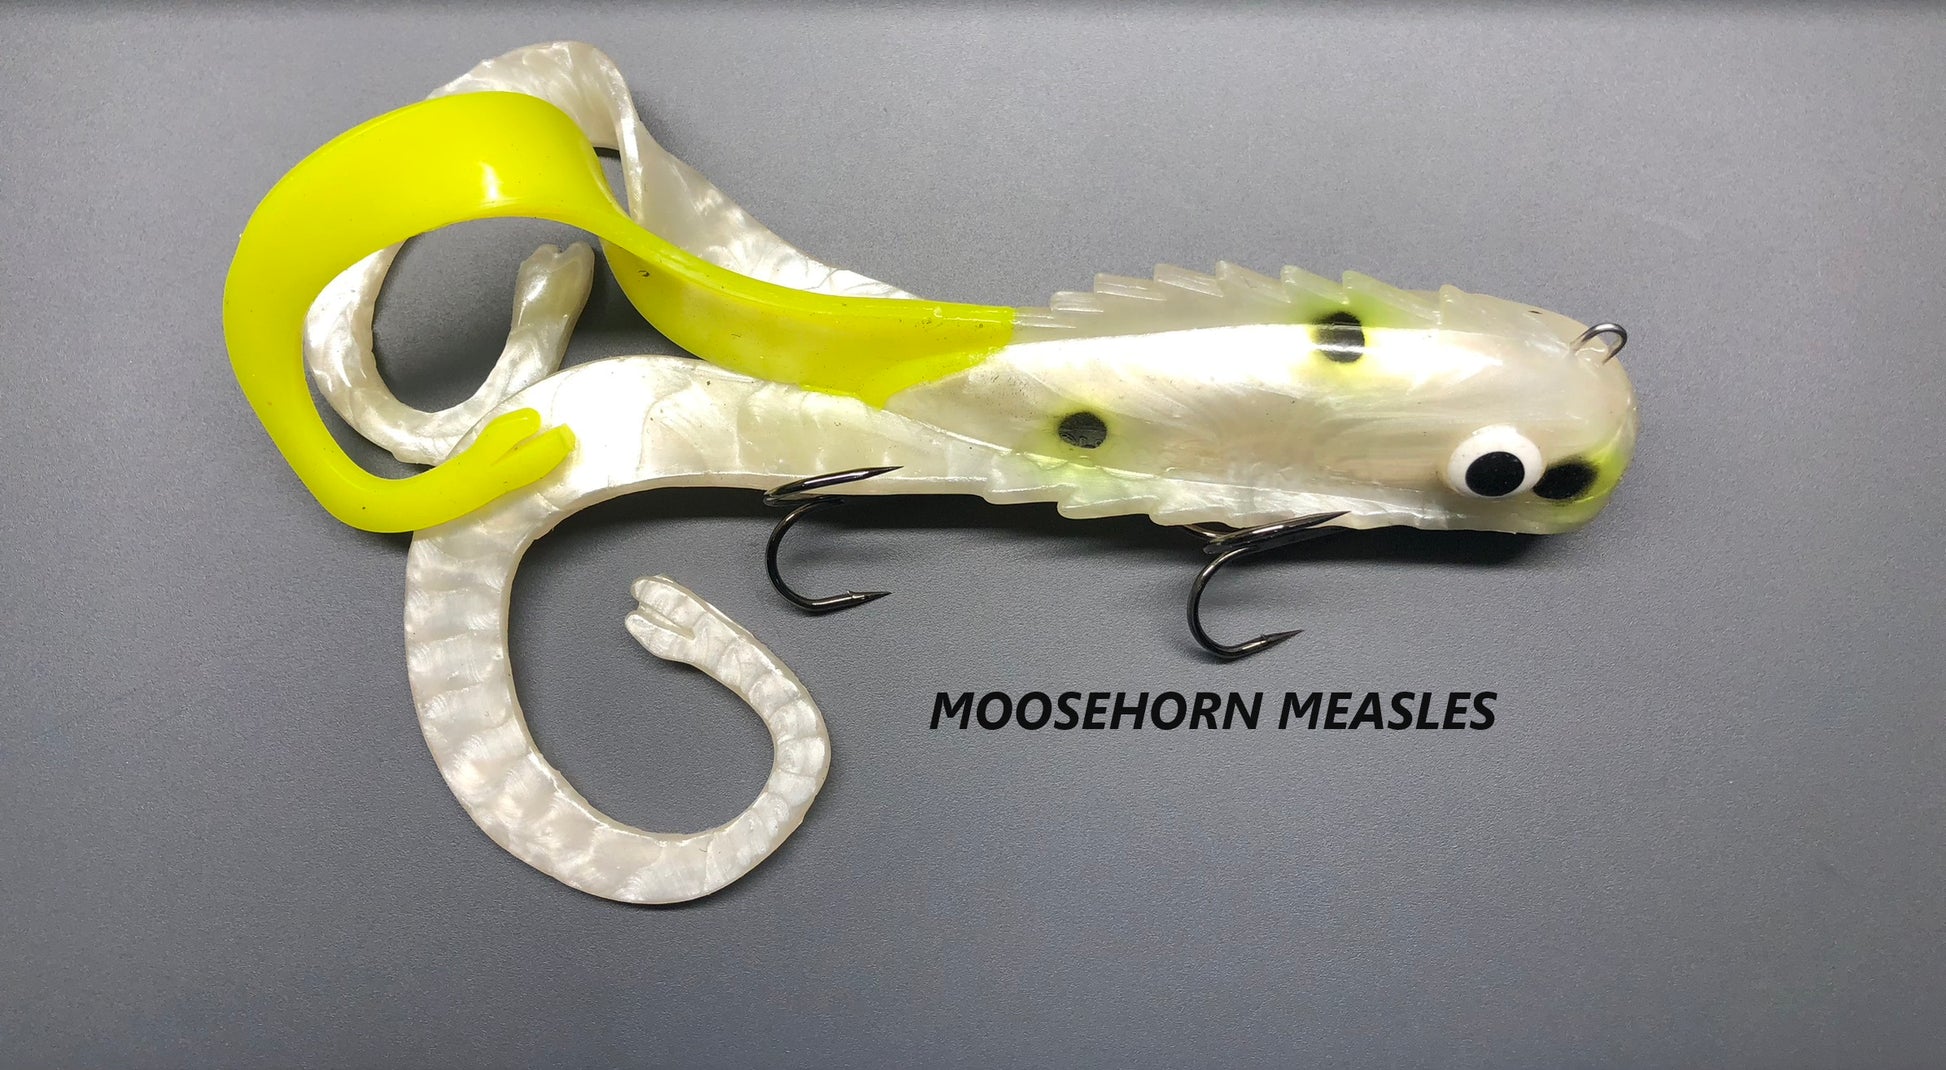 This revolutionary Chaos Tackle Moosehorn Measles Mini Medussa Swimbait lure is like nothing you've ever seen, but it's everything that big muskies dream of! The extra-lively, triple-tailed, brilliantly colored Medussa features a rock-solid interior harness locked onto two big, sticky-sharp trebles; and the overall quality of construction is as good as it gets! Jerk it, rip it, troll it, slow roll it, or straight-retrieve it; it doesn't matter how you fish it- Fish want to eat it!